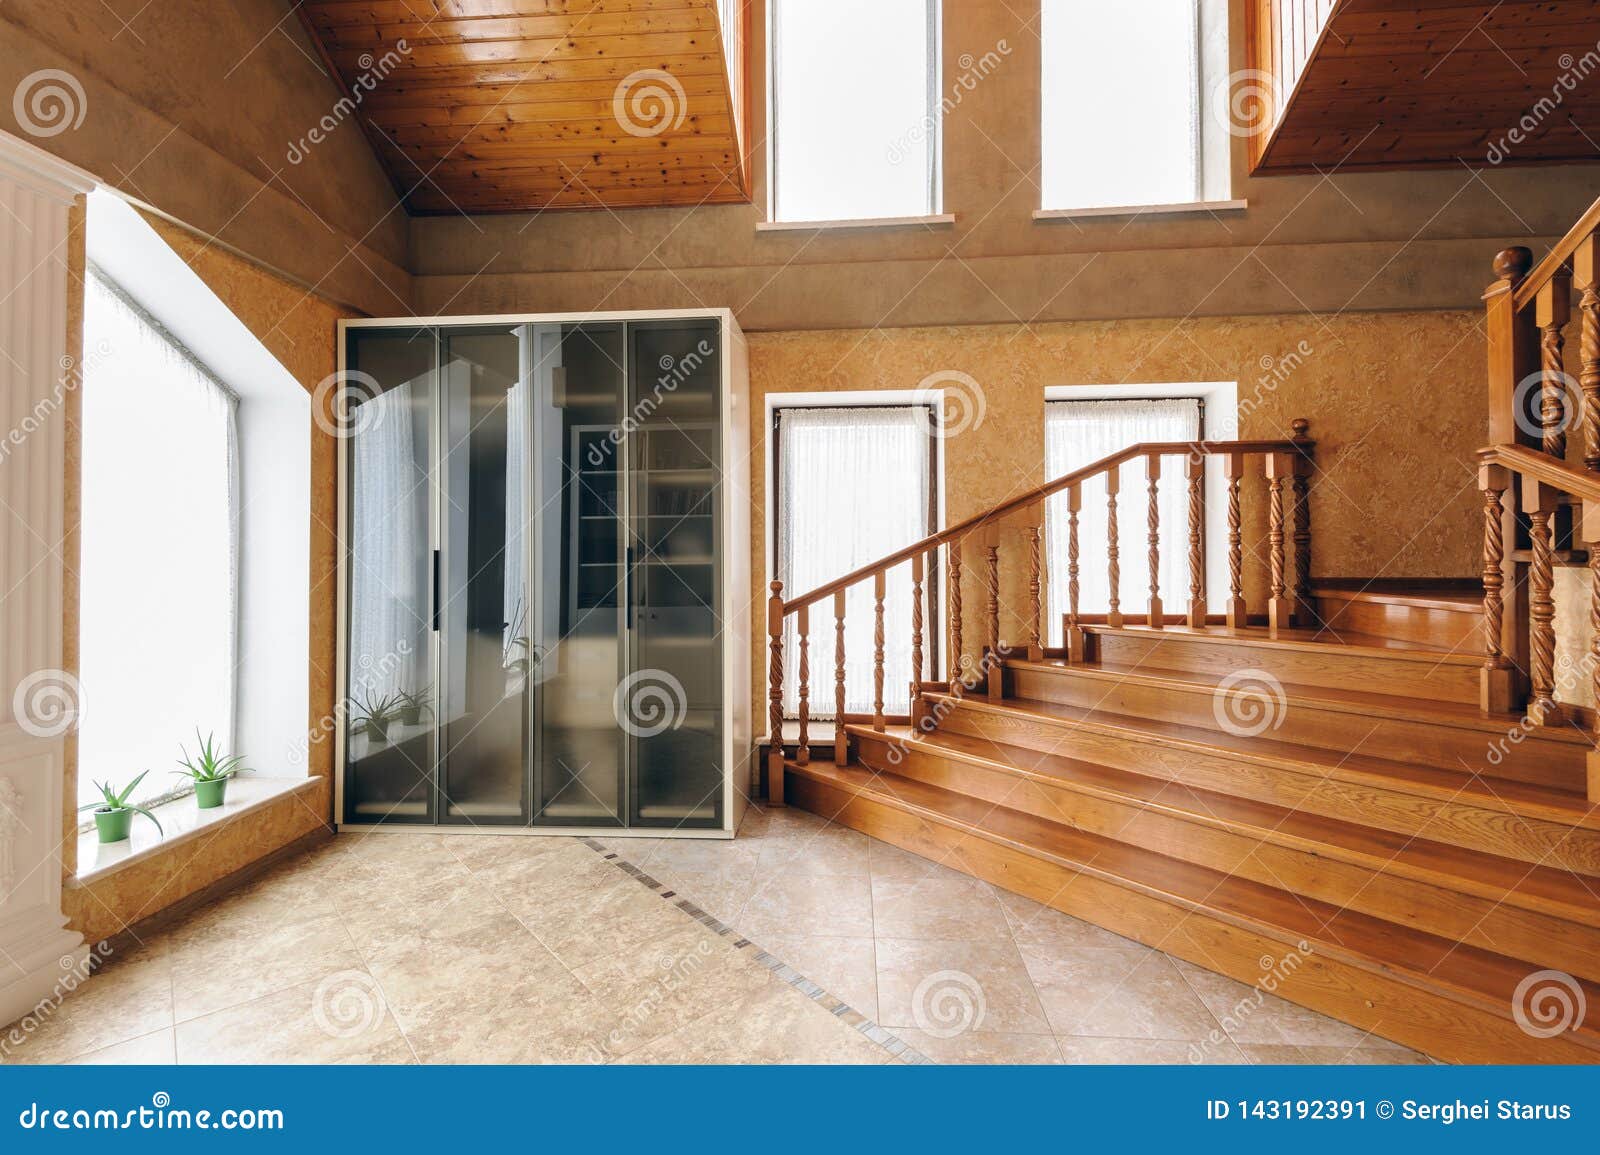 Large Entrance Hall Of A iModerni iHousei With Wooden Stairs 